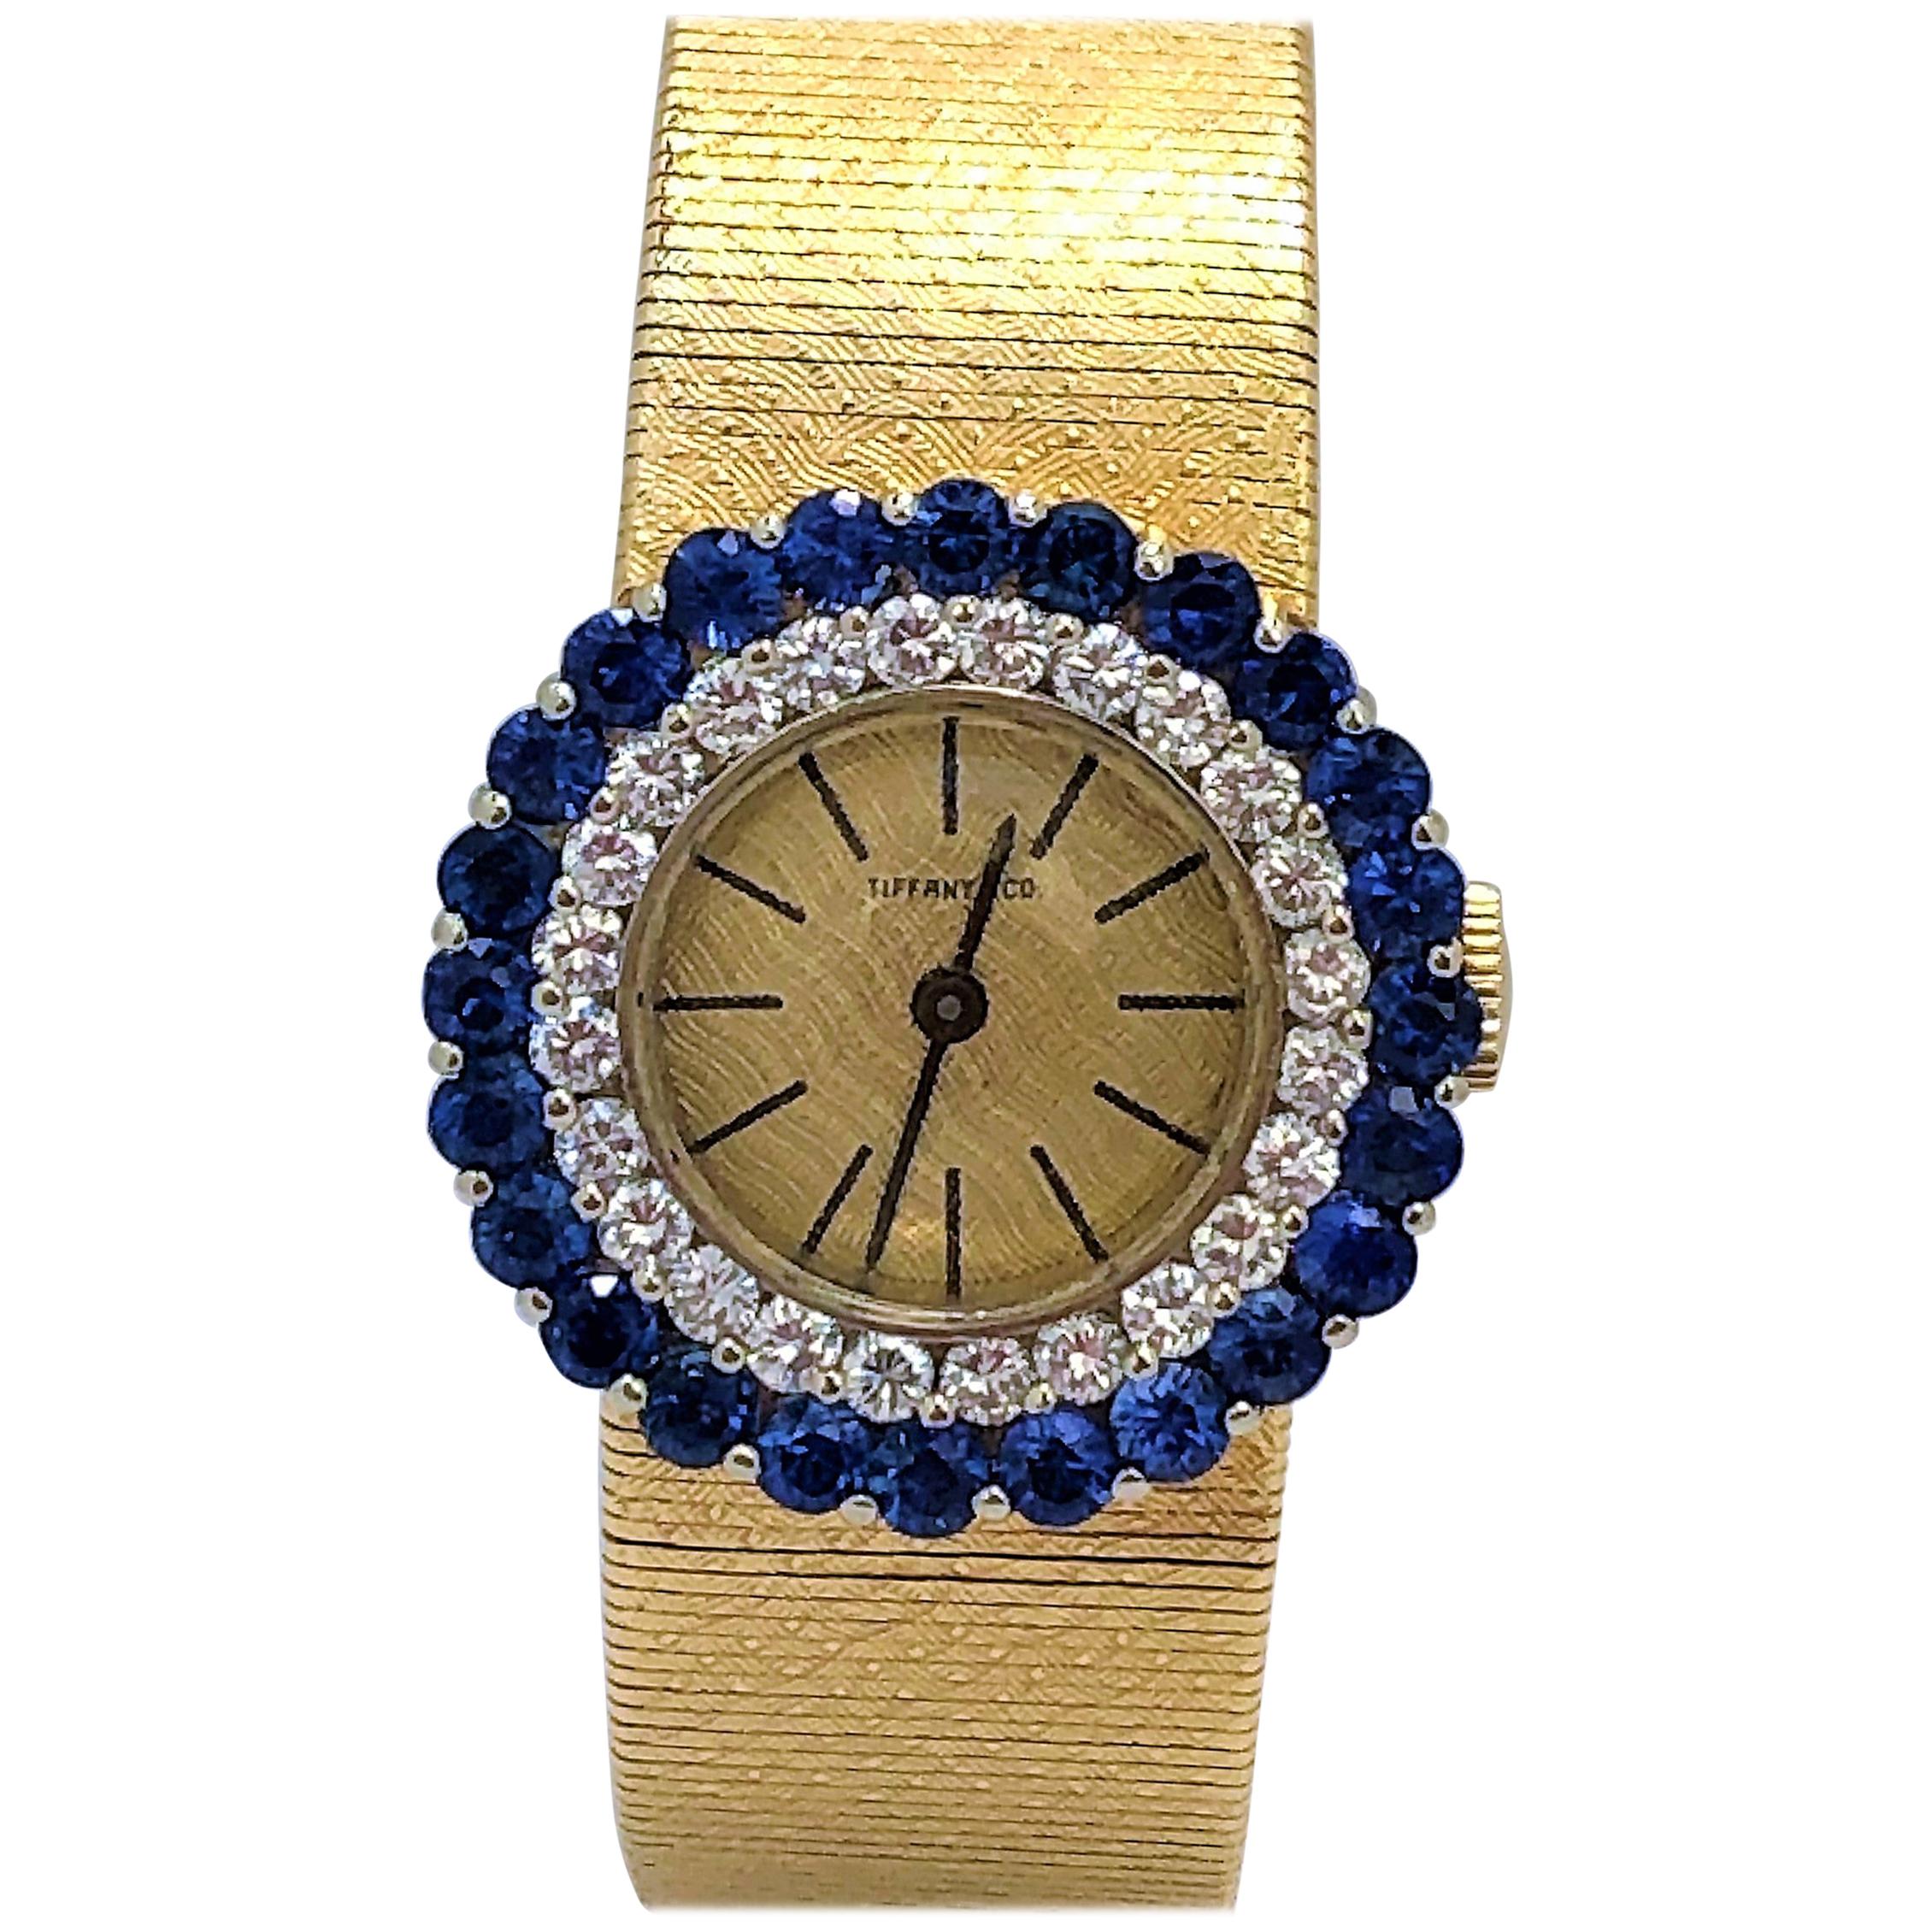 Tiffany & Co. Gold Watch with One Diamond Bezel and One Sapphire Bezel